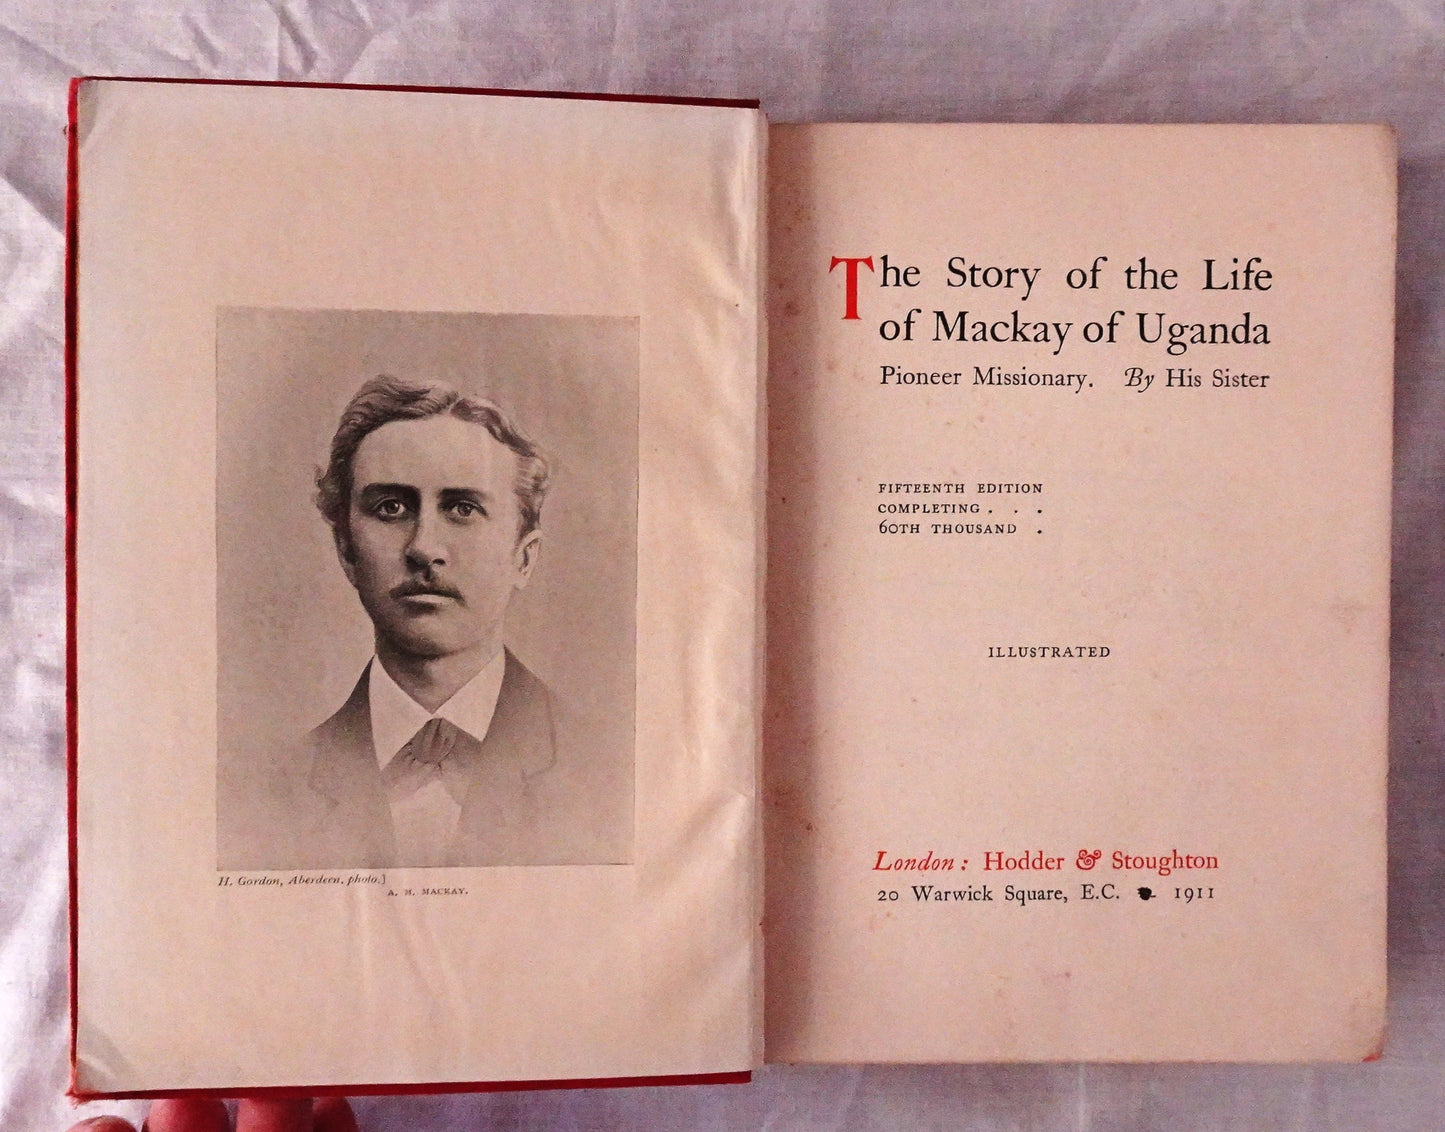 The Story of the Life of Mackay of Uganda by His Sister